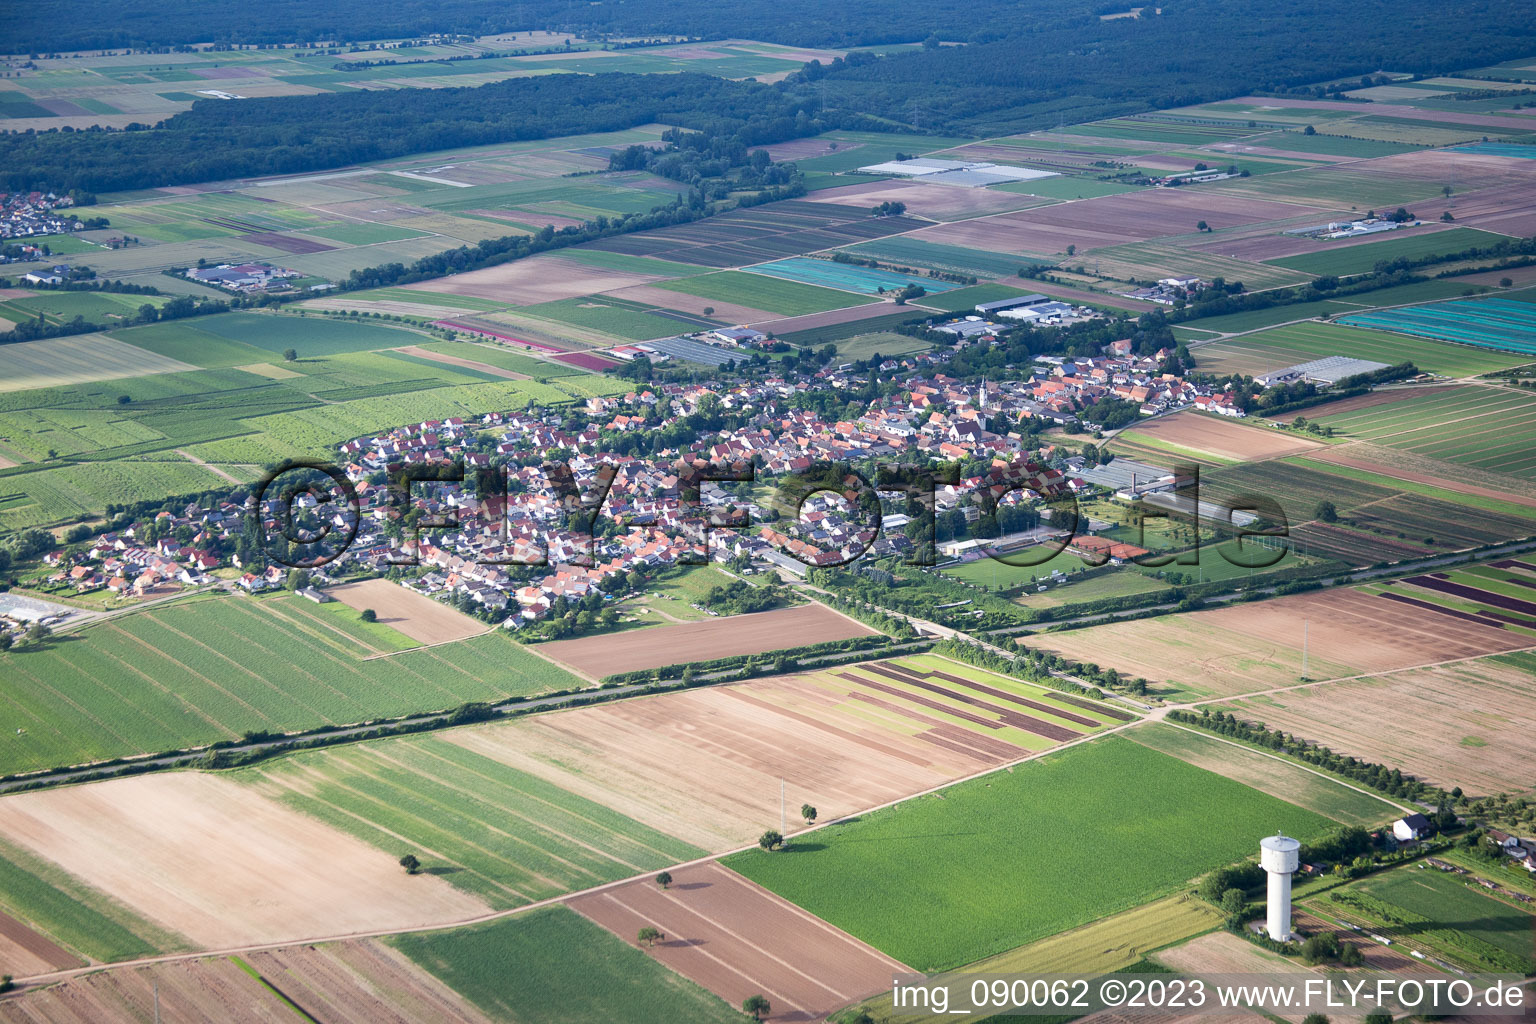 Aerial view of Weingarten in the state Rhineland-Palatinate, Germany